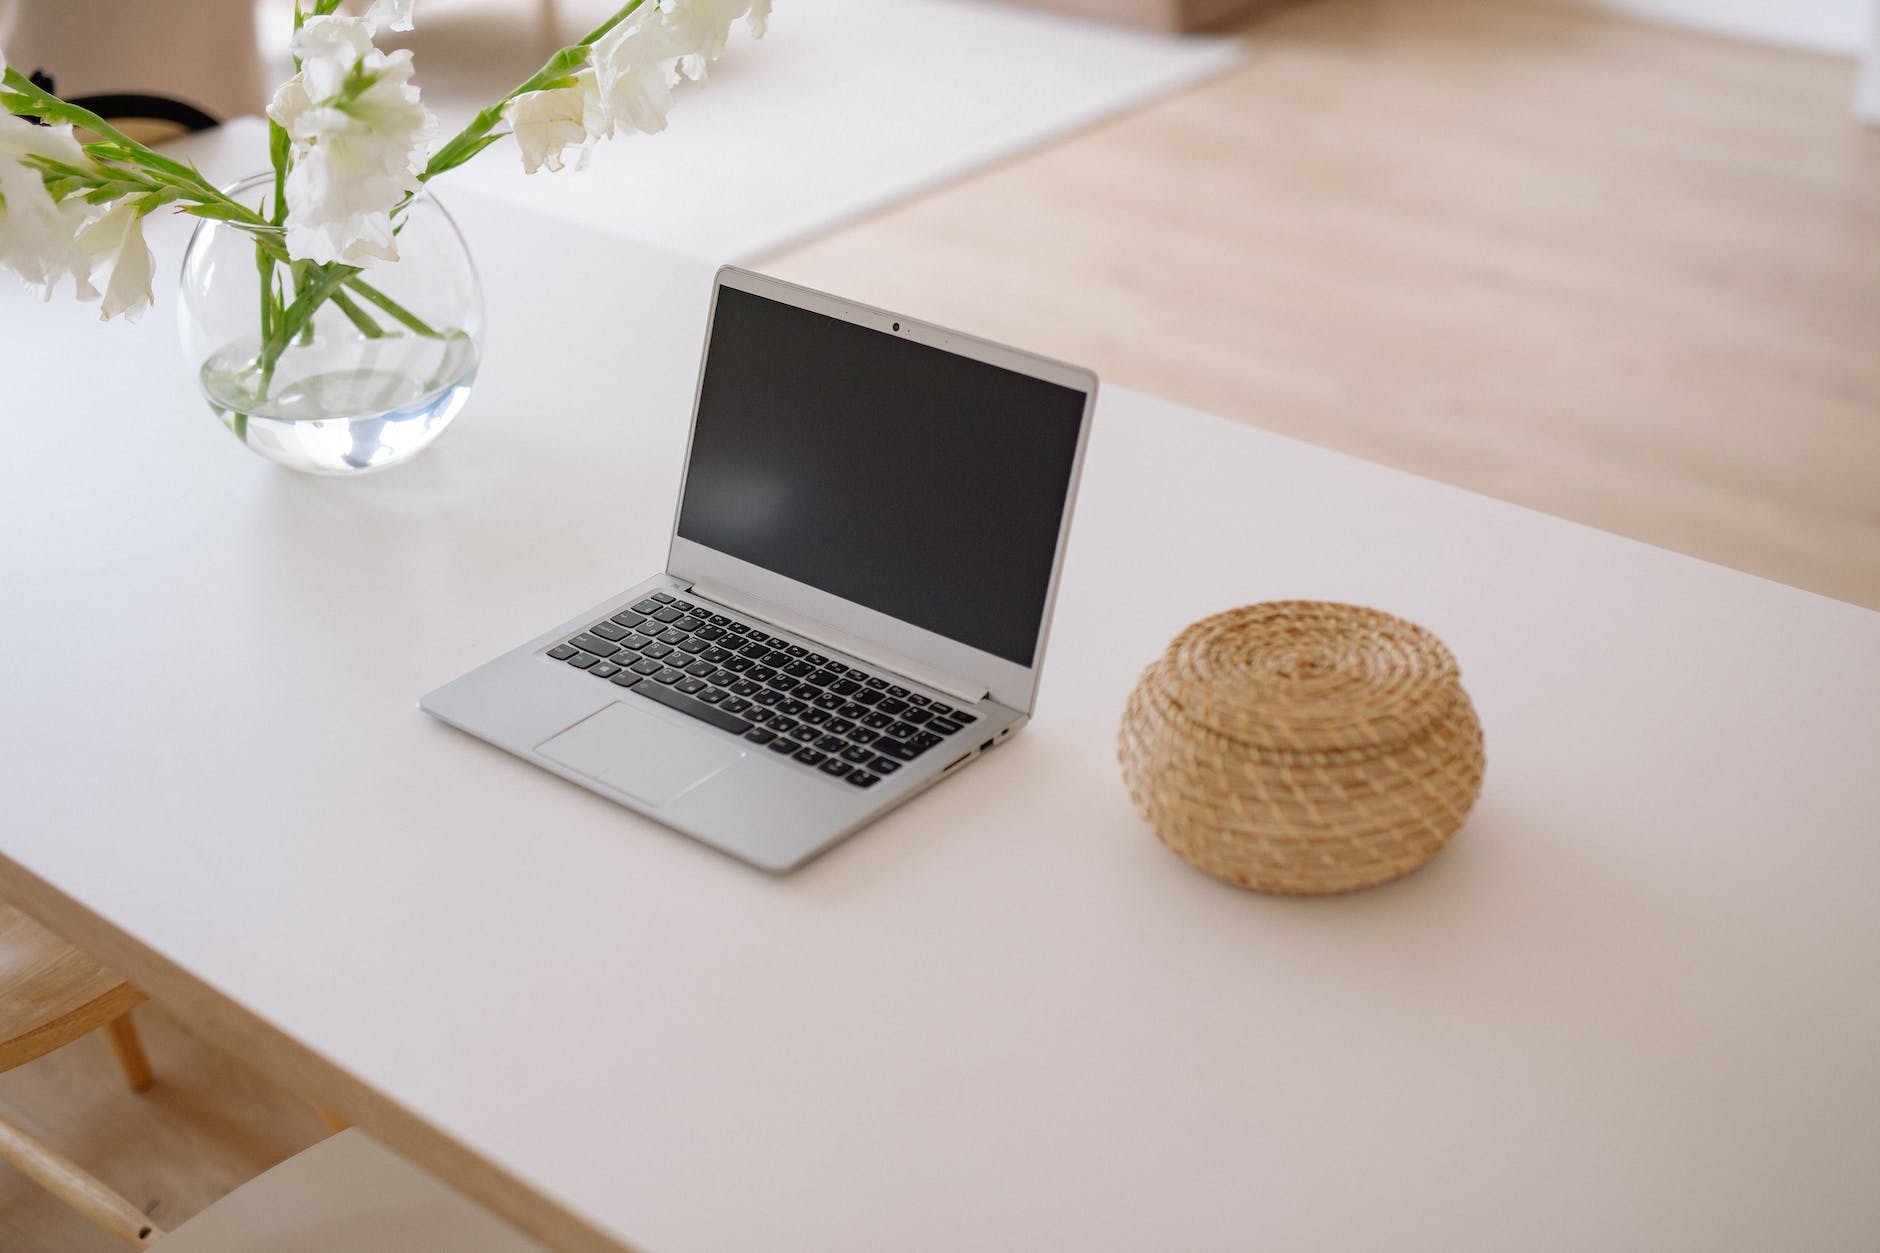 laptop with basket and white flowers in glass vase on a desk